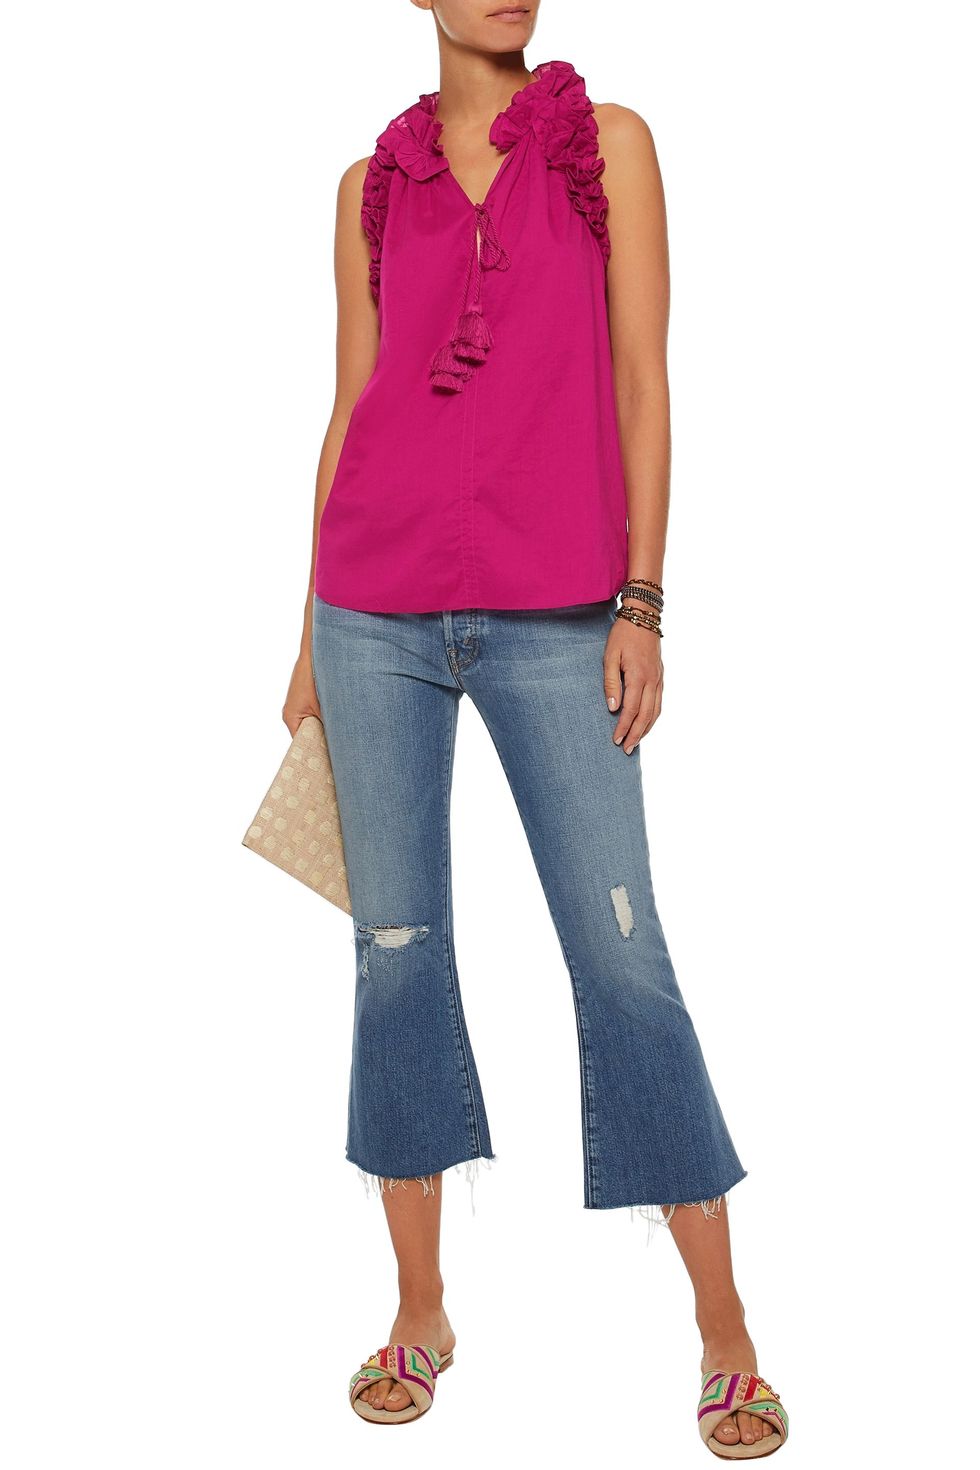 A Magenta Ruffle-Trimmed Top